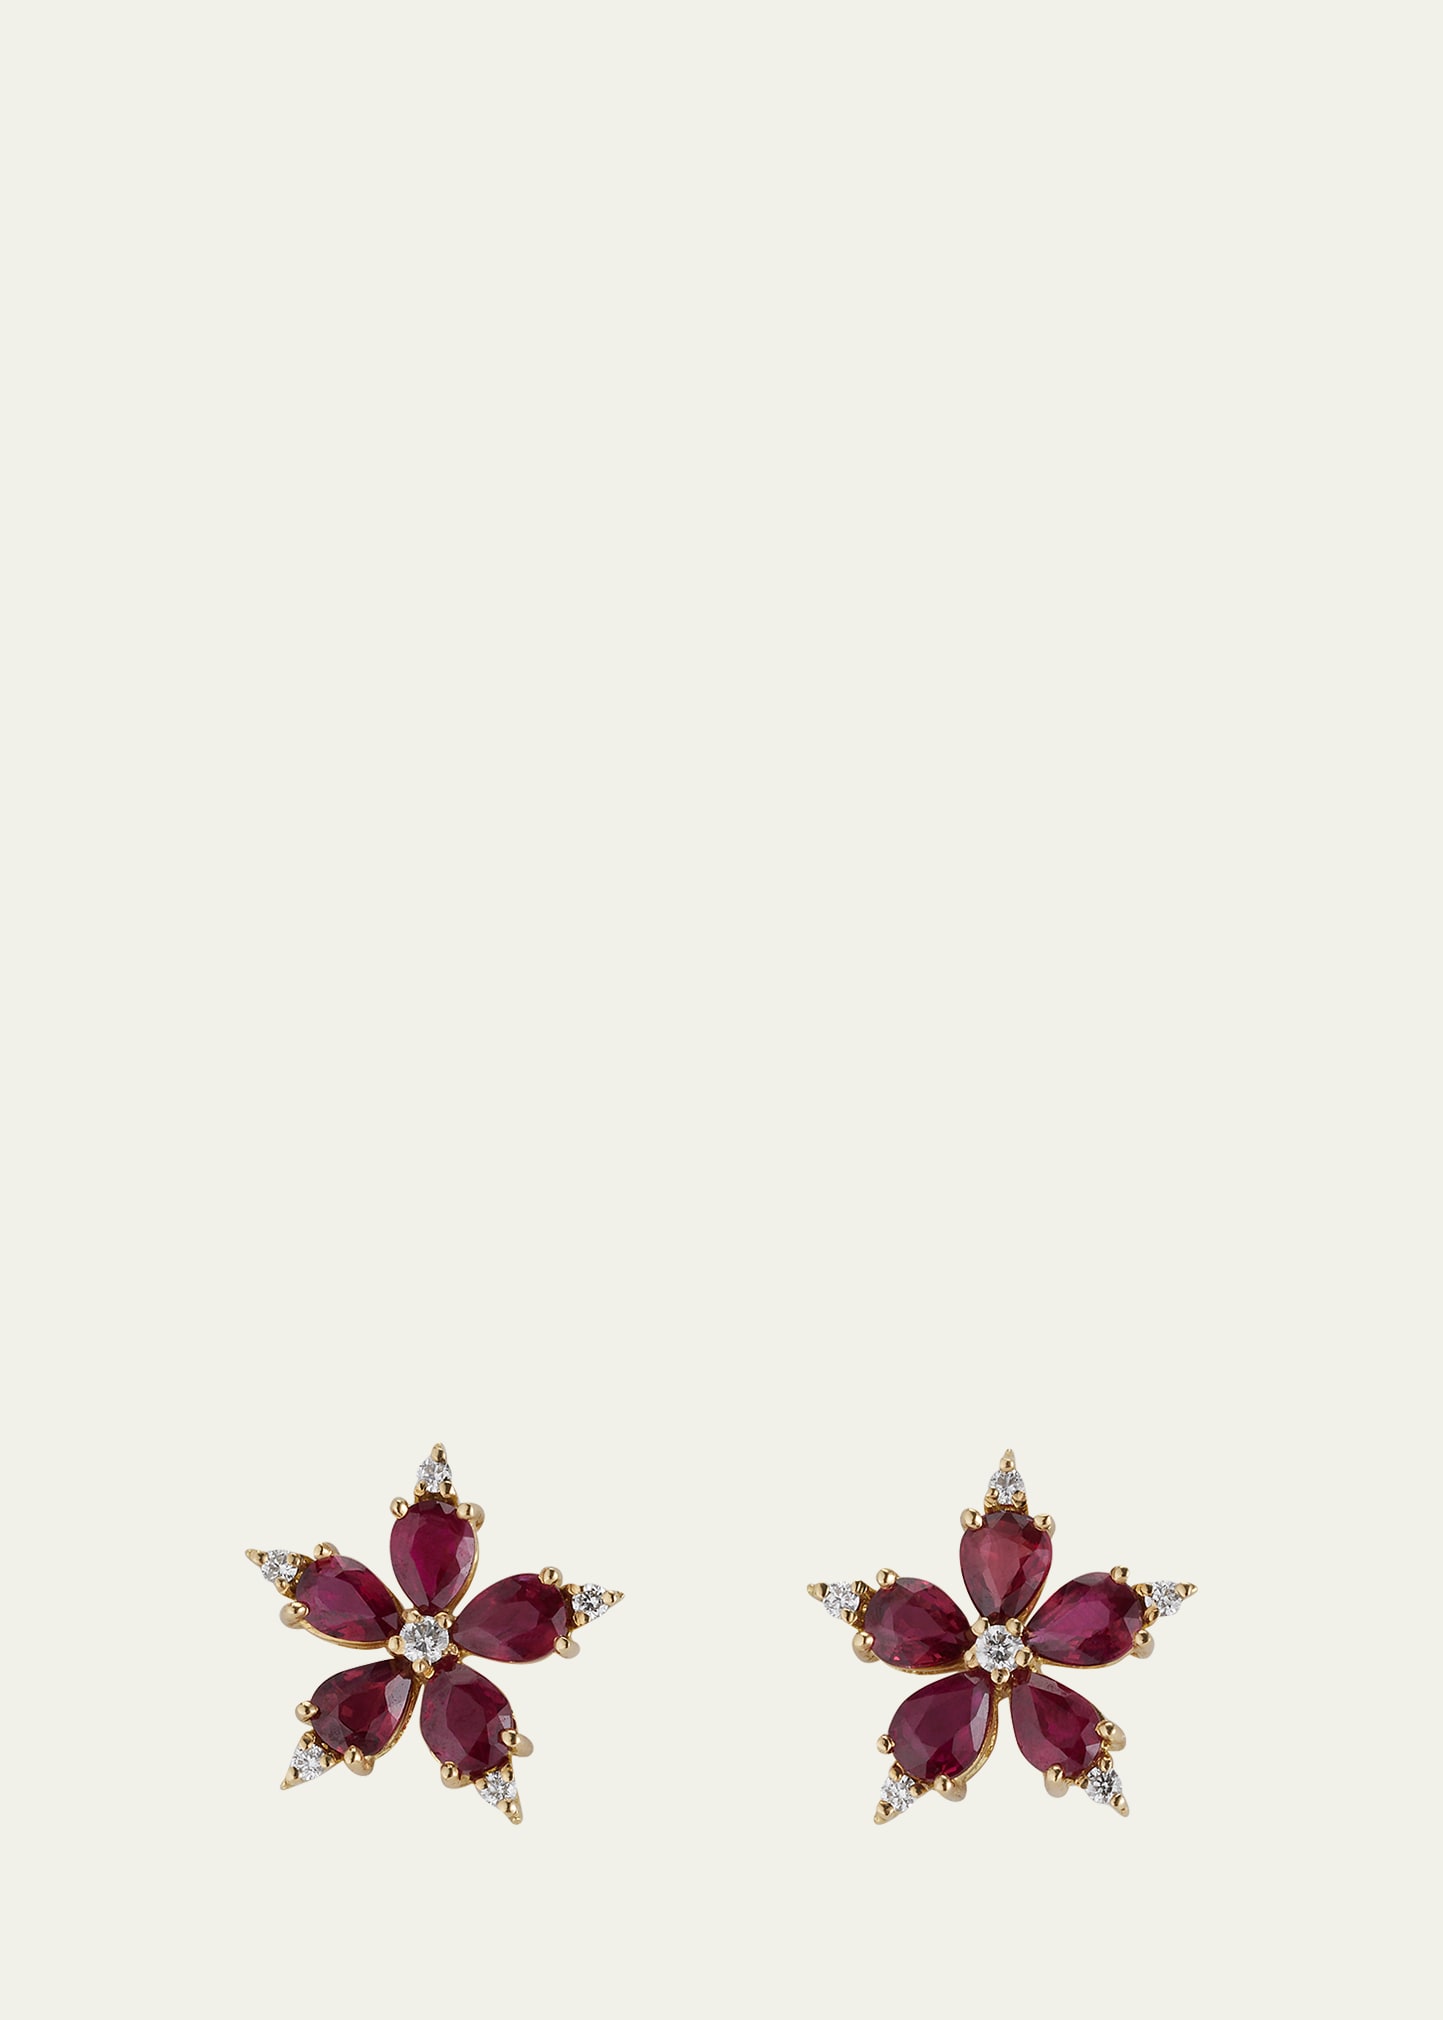 Yellow Gold Star Anise Stud Earrings with Diamonds and Rubies